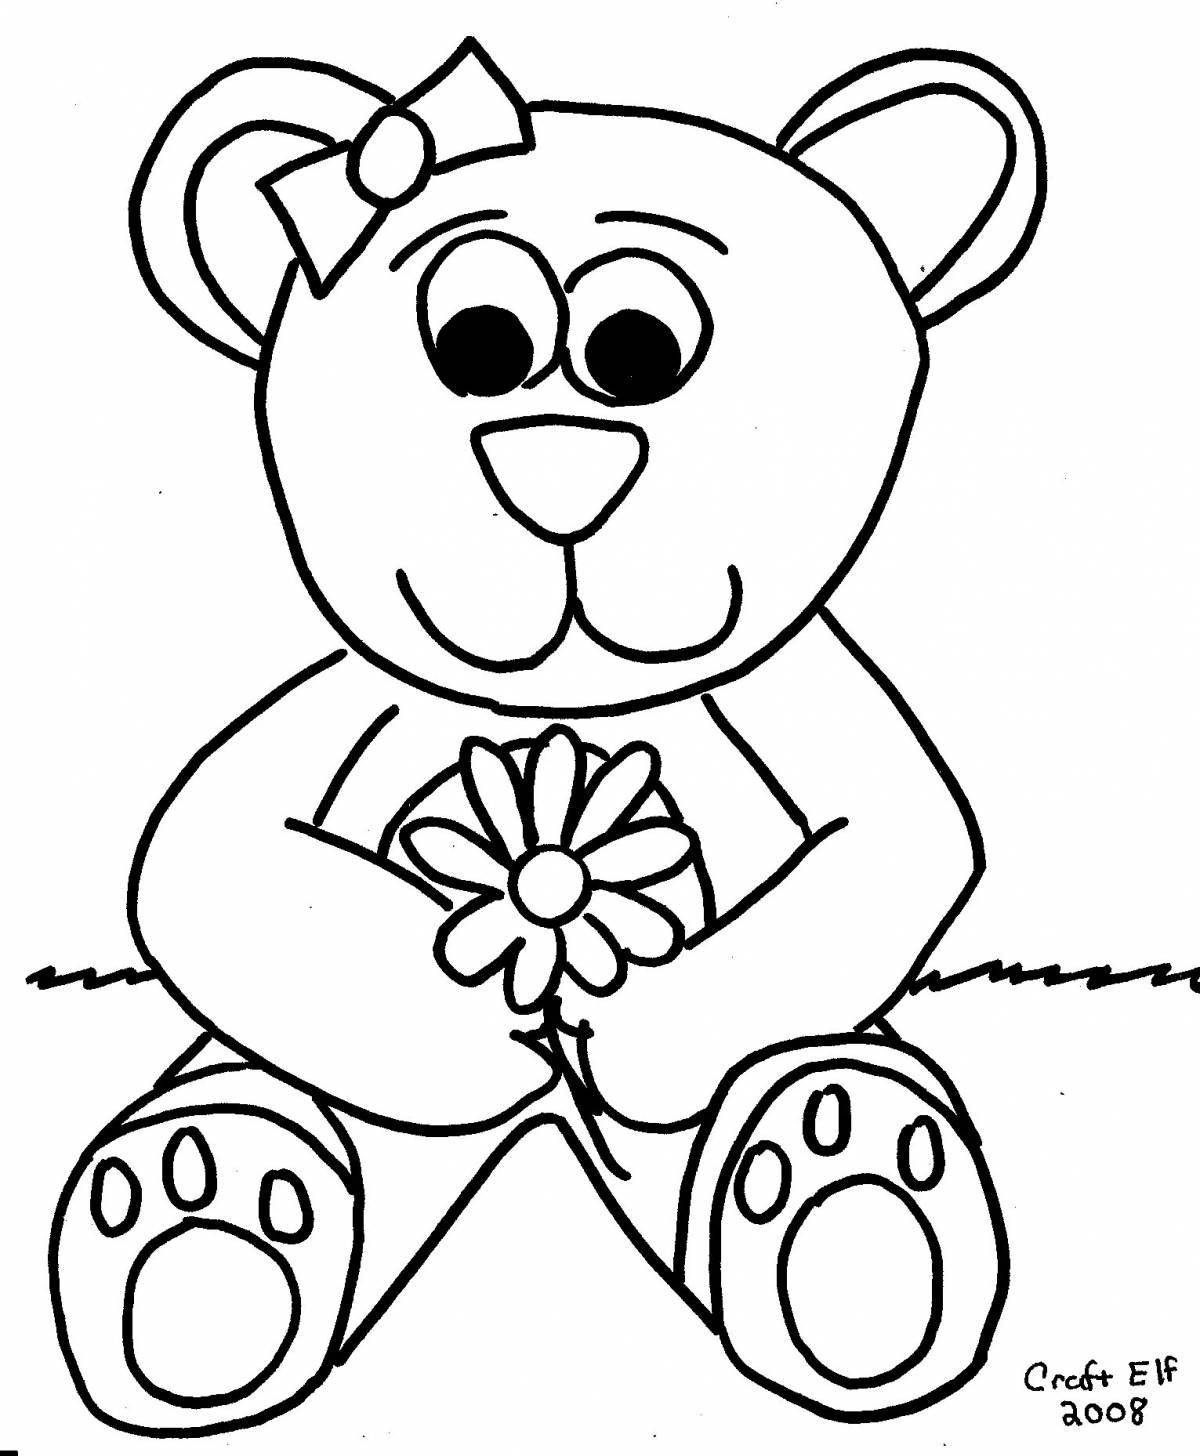 Amazing bear coloring book for kids 5-6 years old